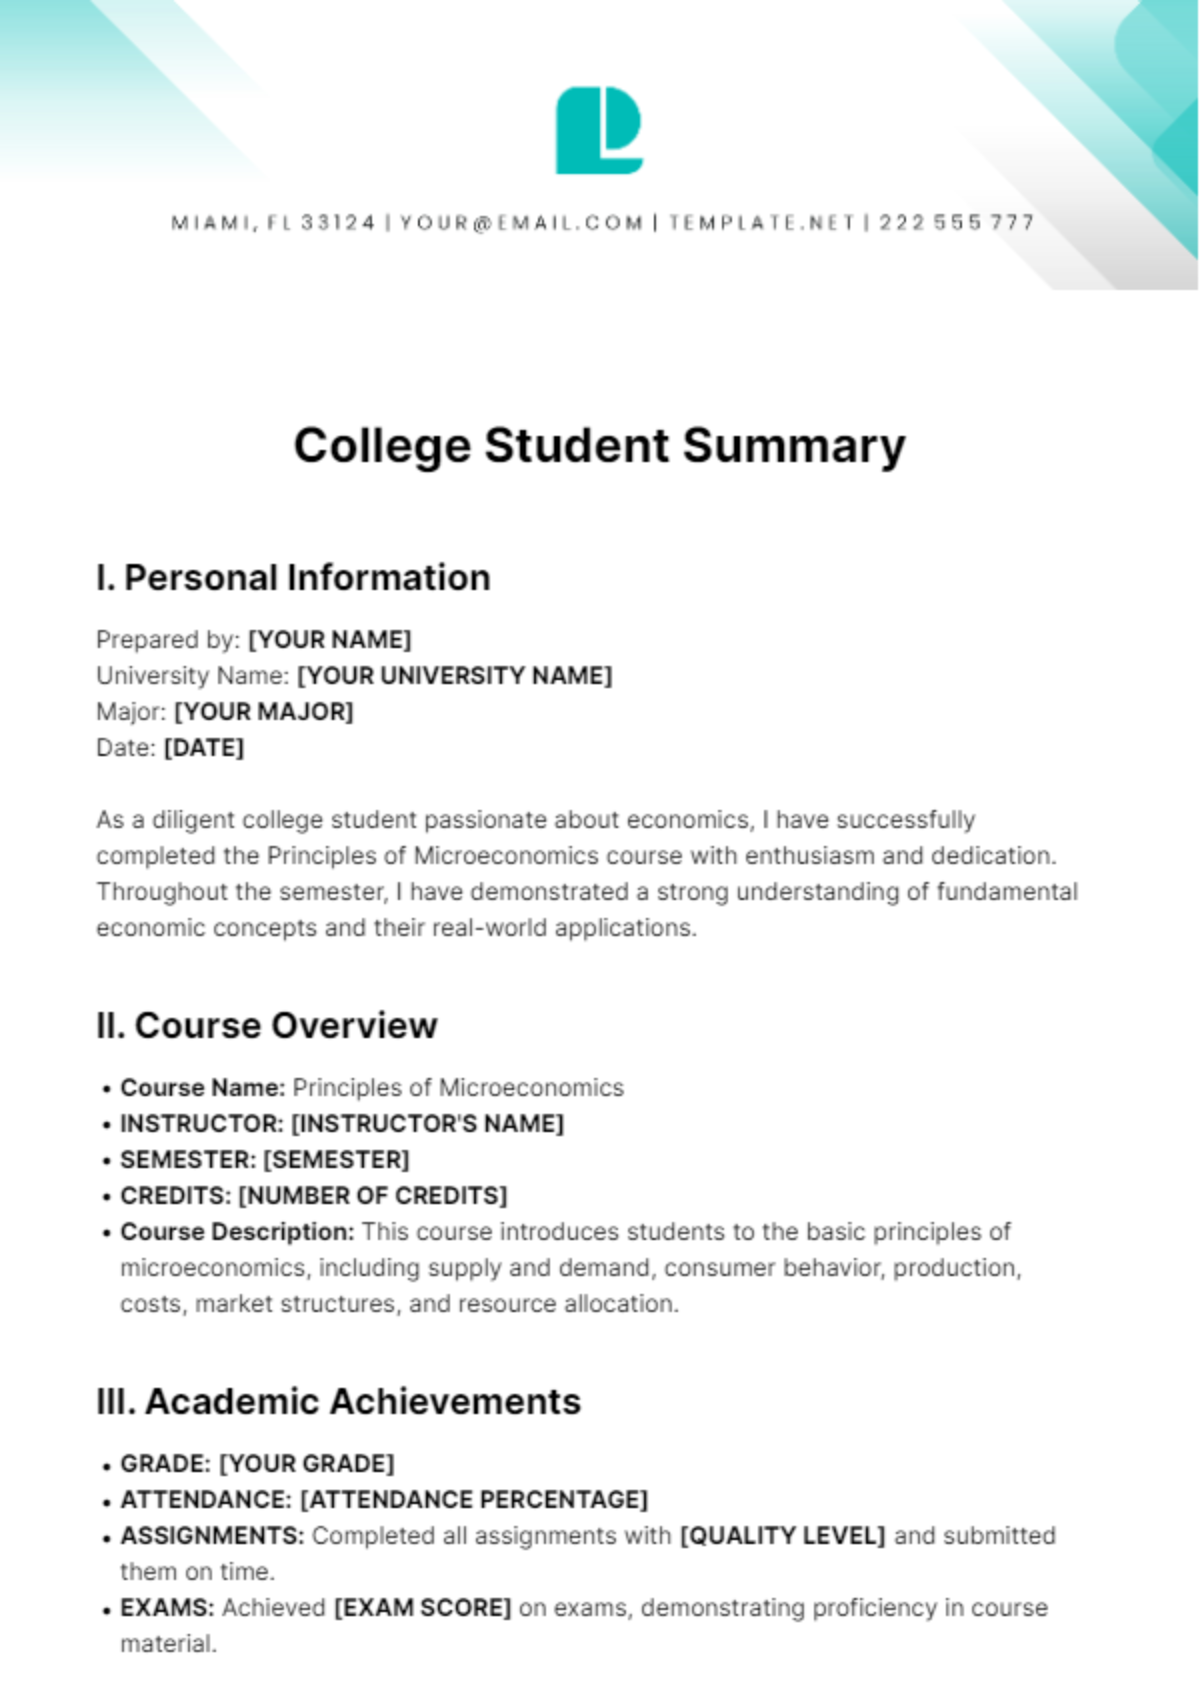 College Student Summary Template